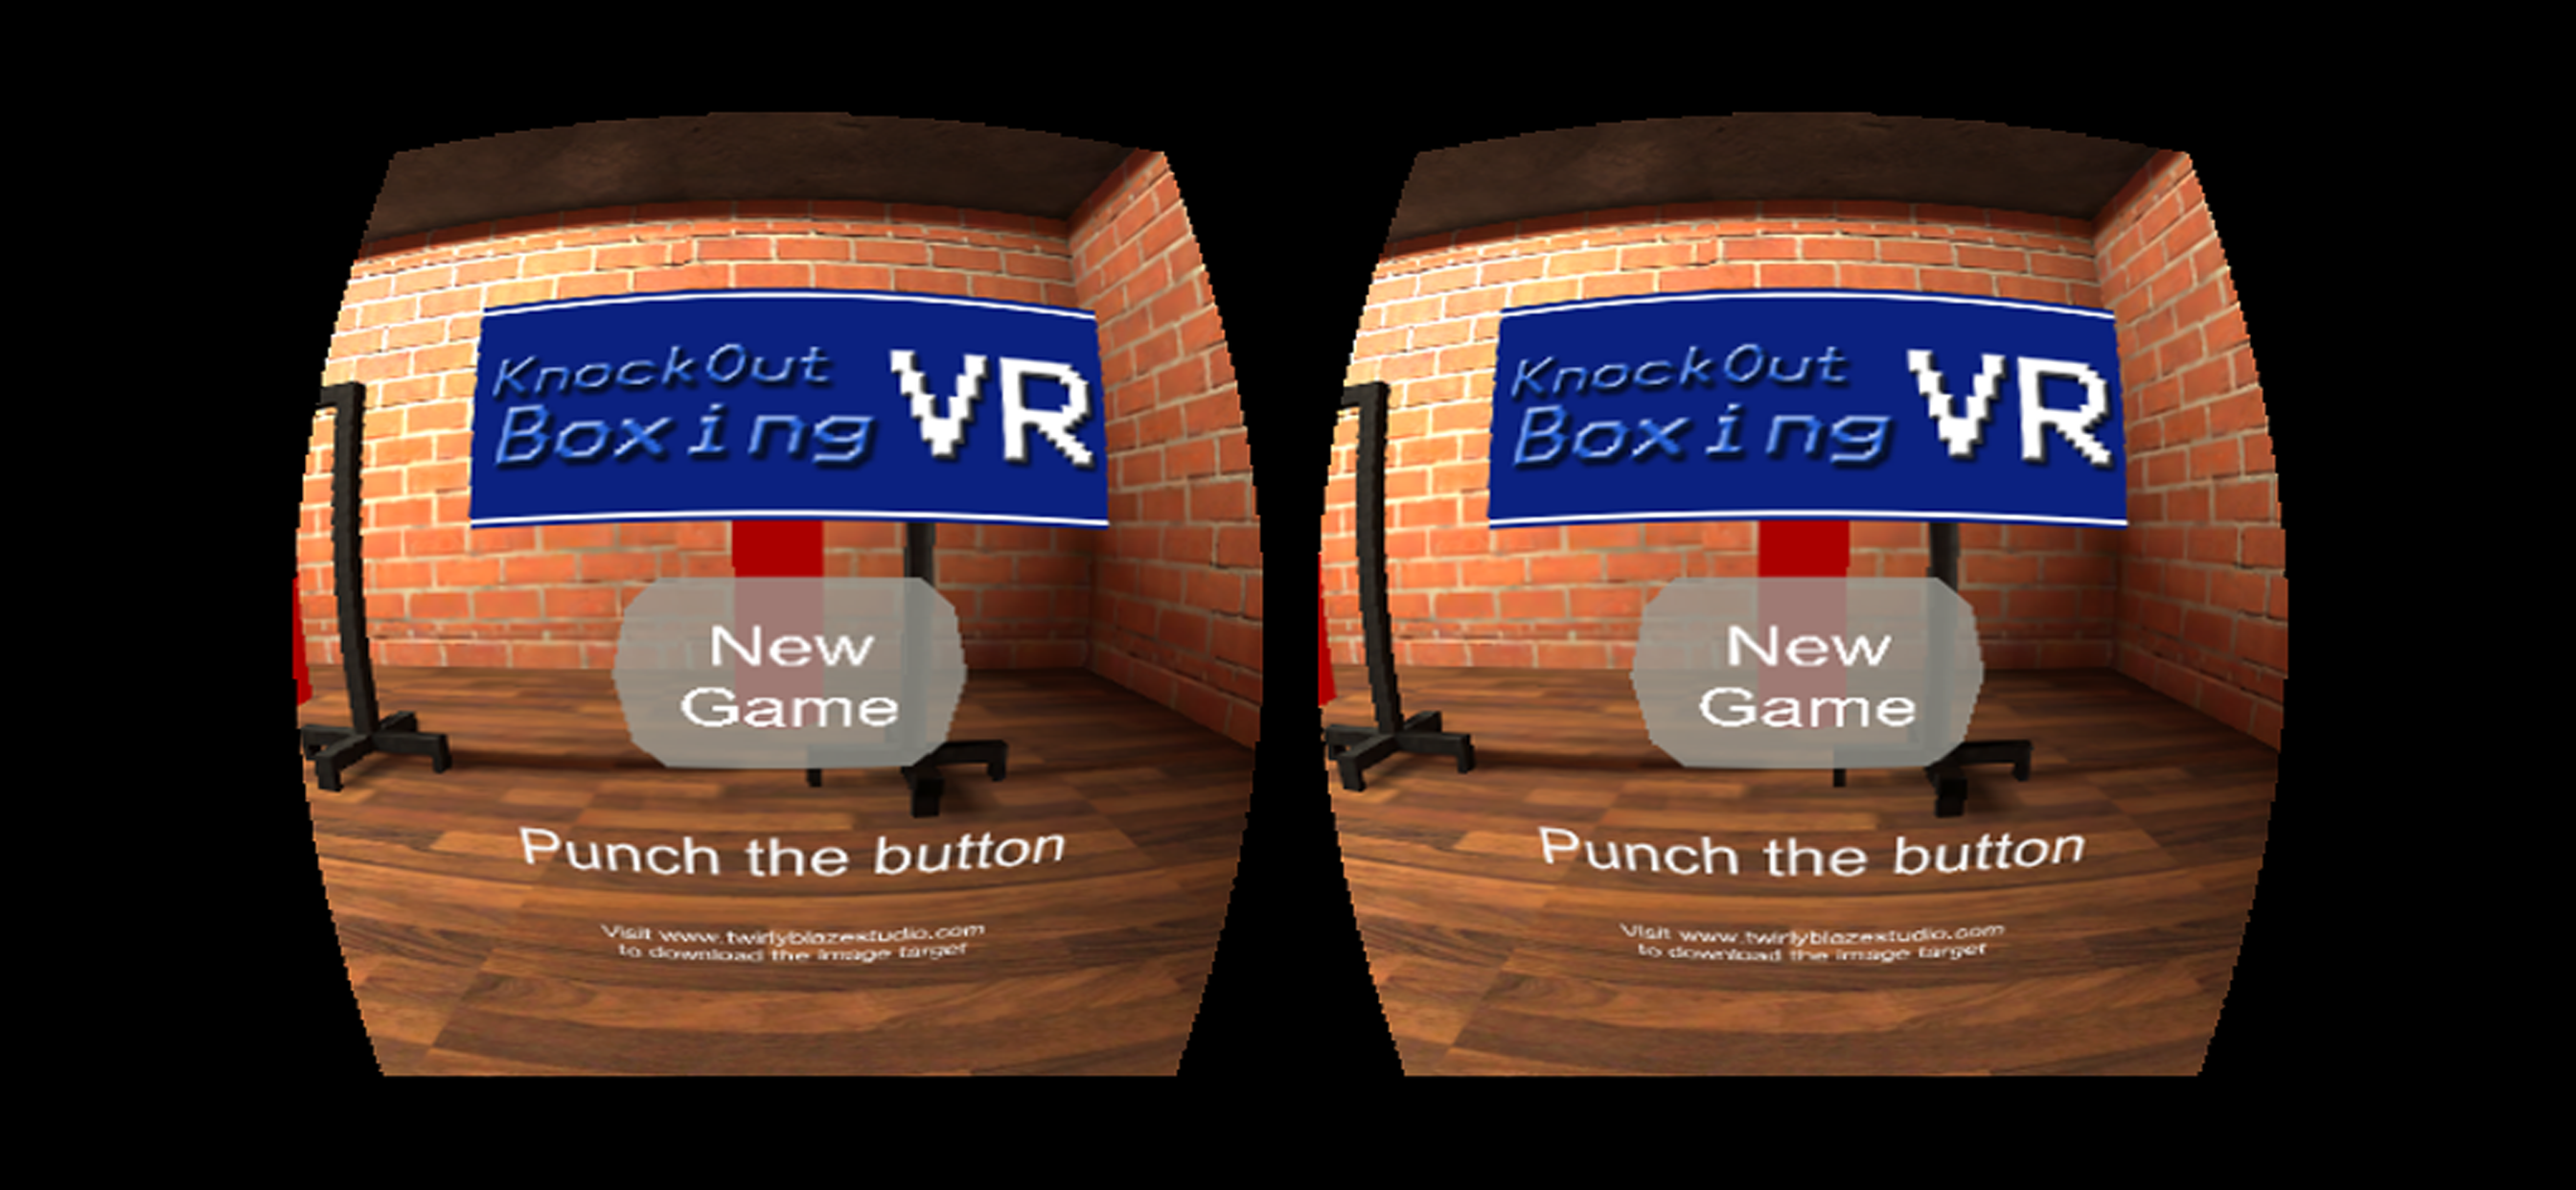 Virtual KnockOut digital interactive shadow boxing game - Geeky